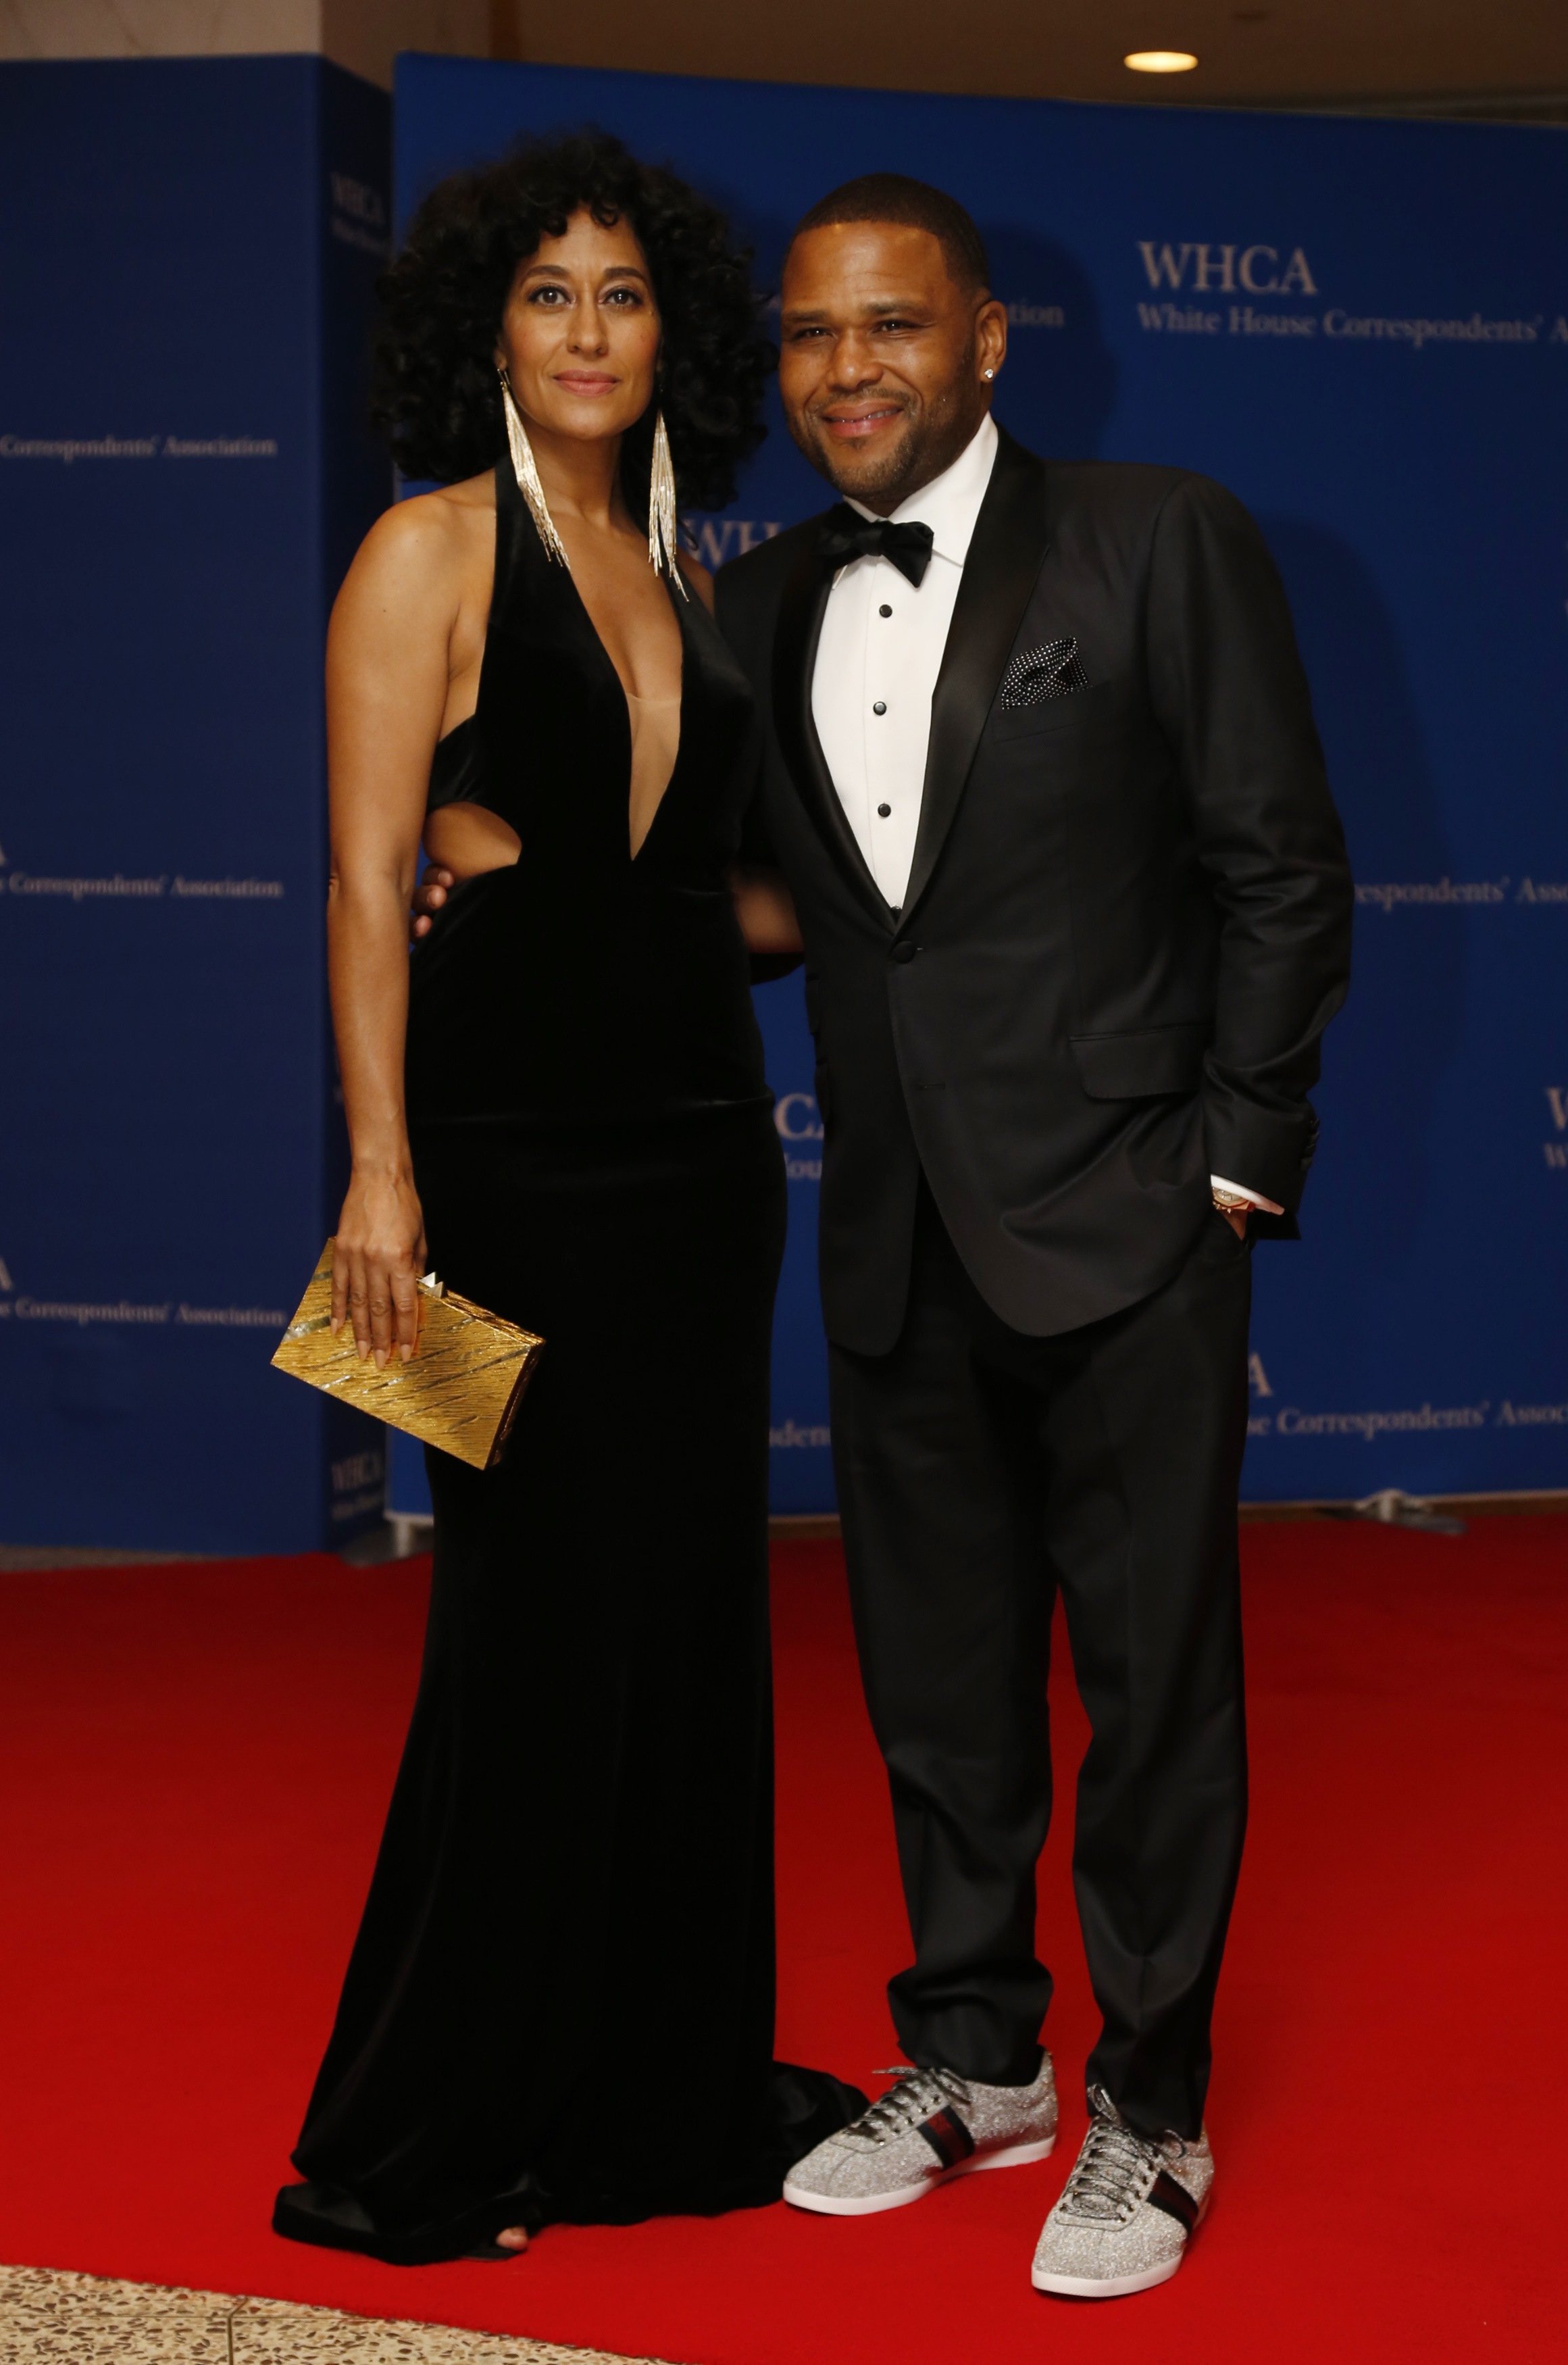 Actors Tracee Ellis Ross and Anthony Anderson attend the White House Correspondents' Association Dinner at the Washington Hilton Hotel in Washington on April 30, 2016.